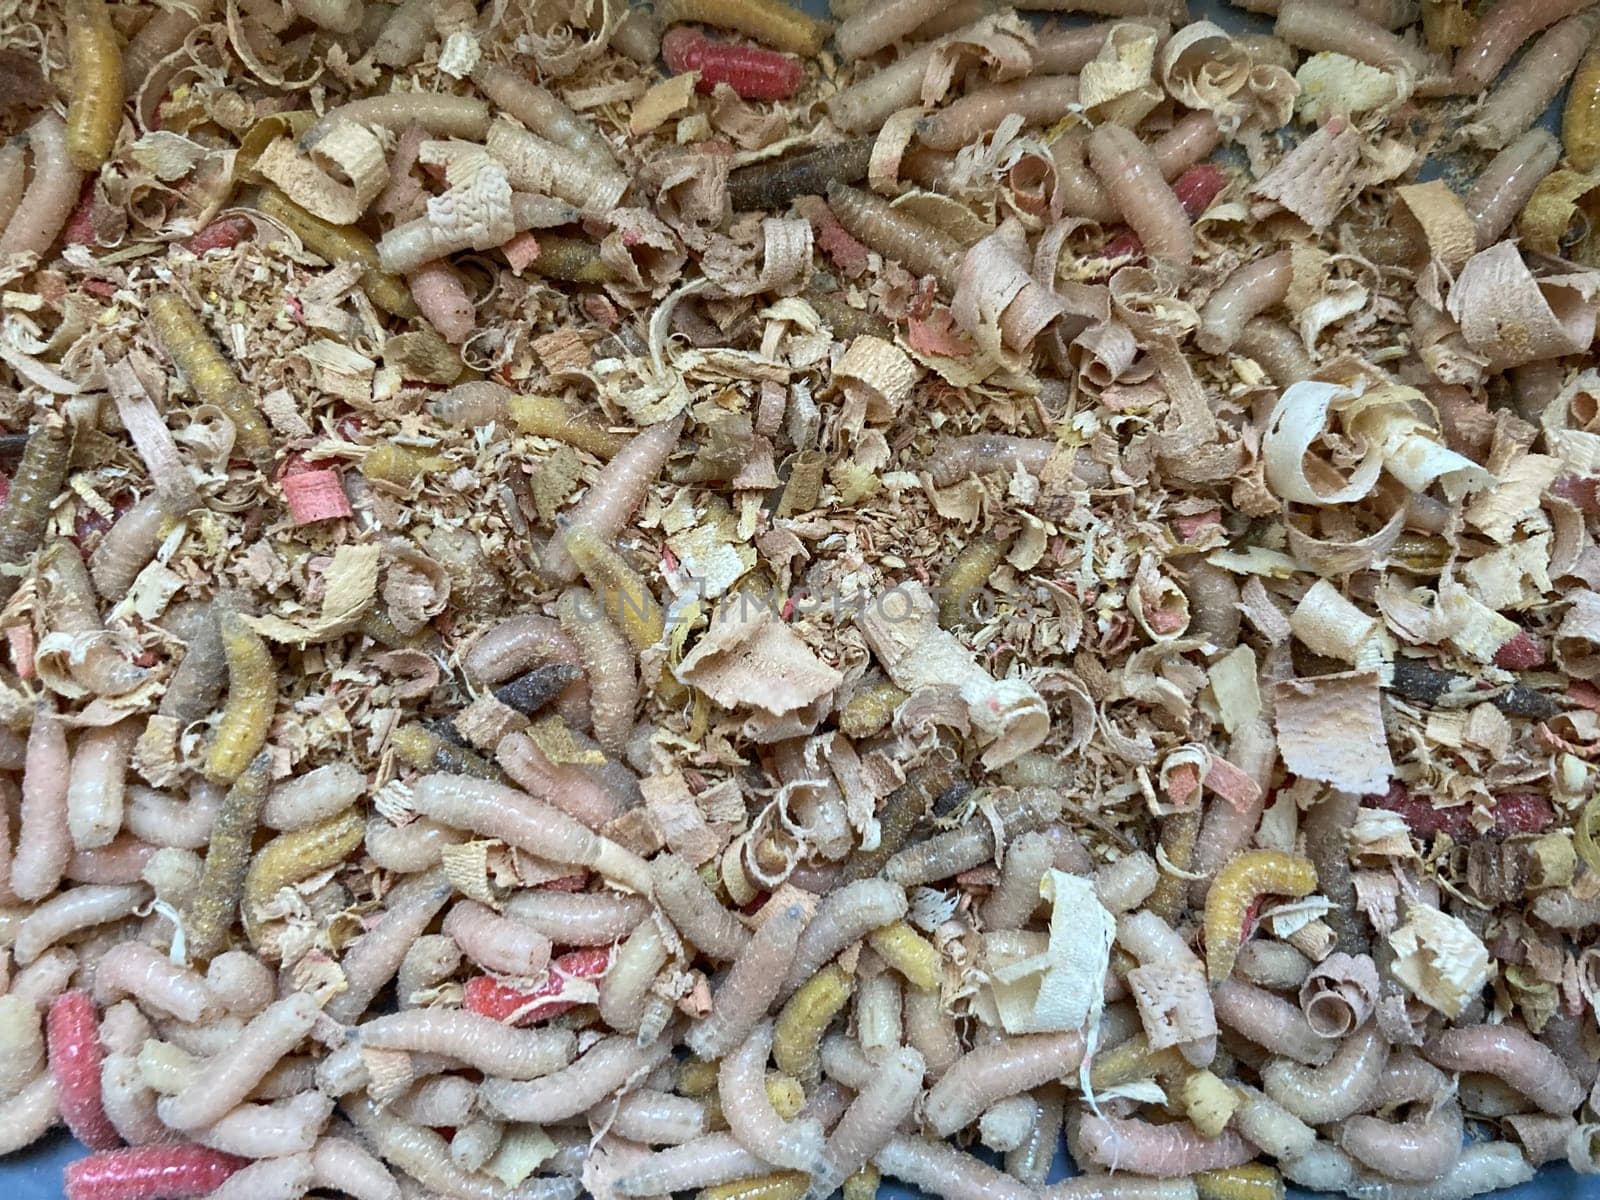 Live maggots food for the fishing